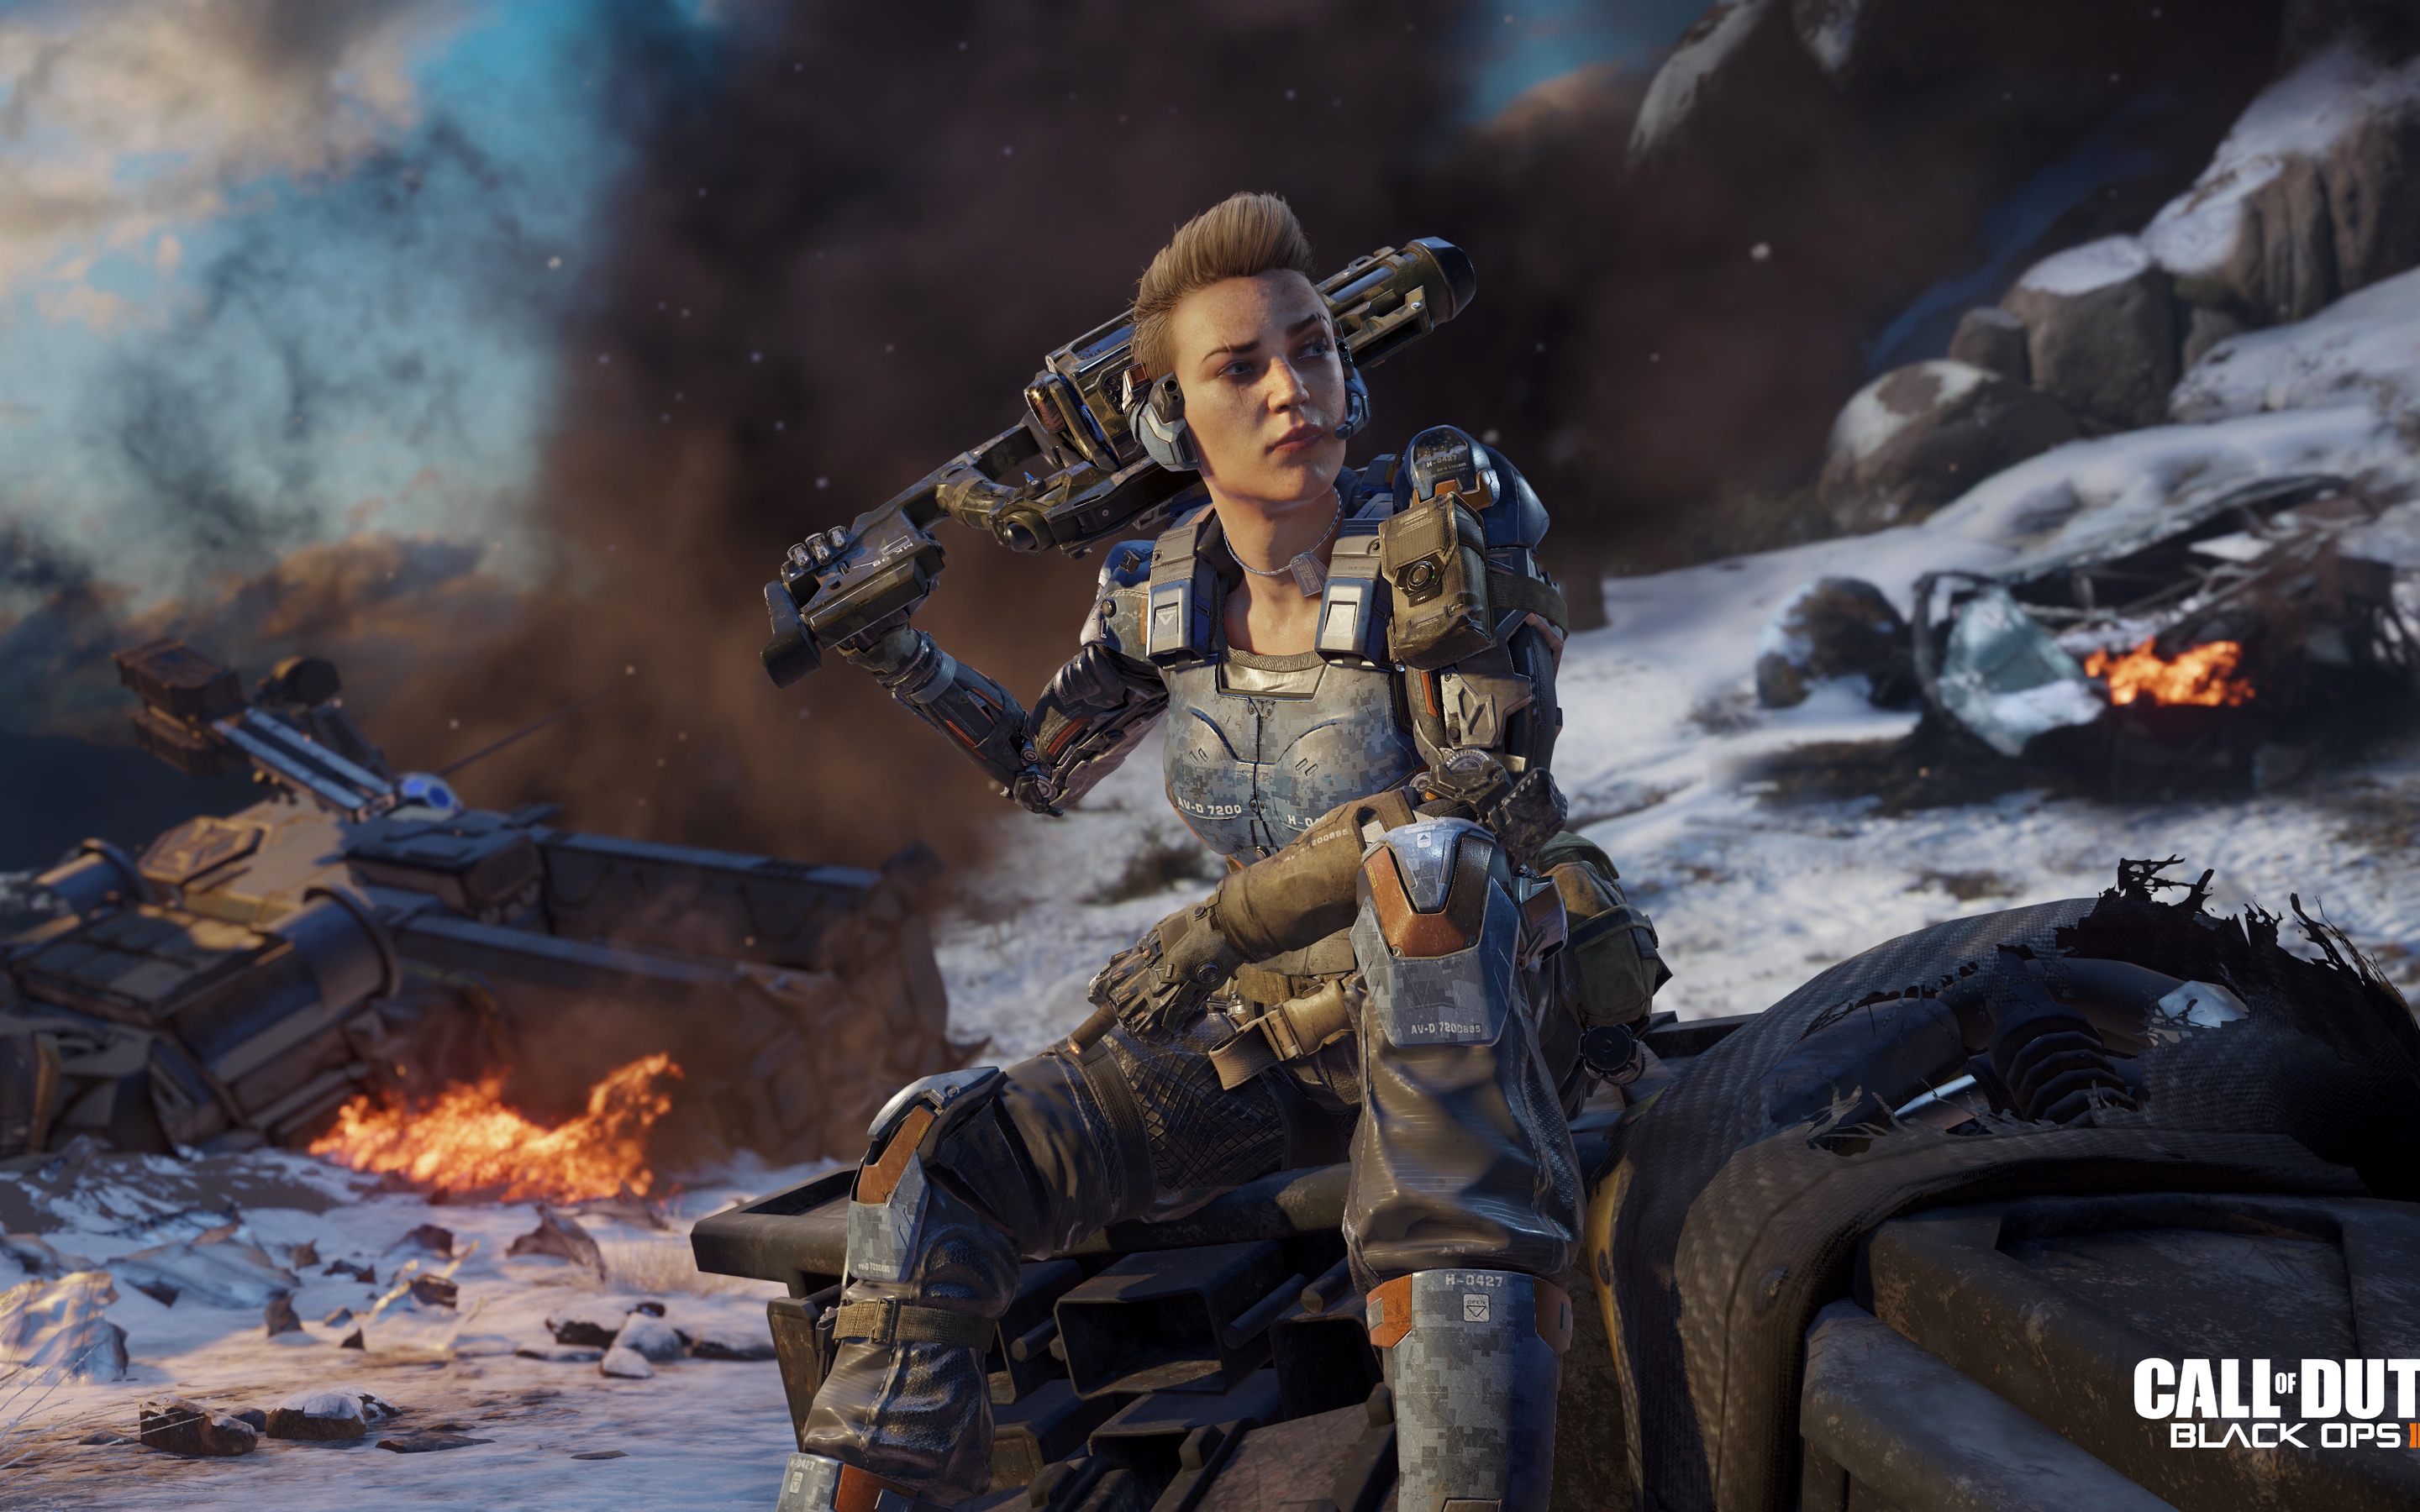 Call of Duty Black Ops 3 Girl for 2880 x 1800 Retina Display resolution